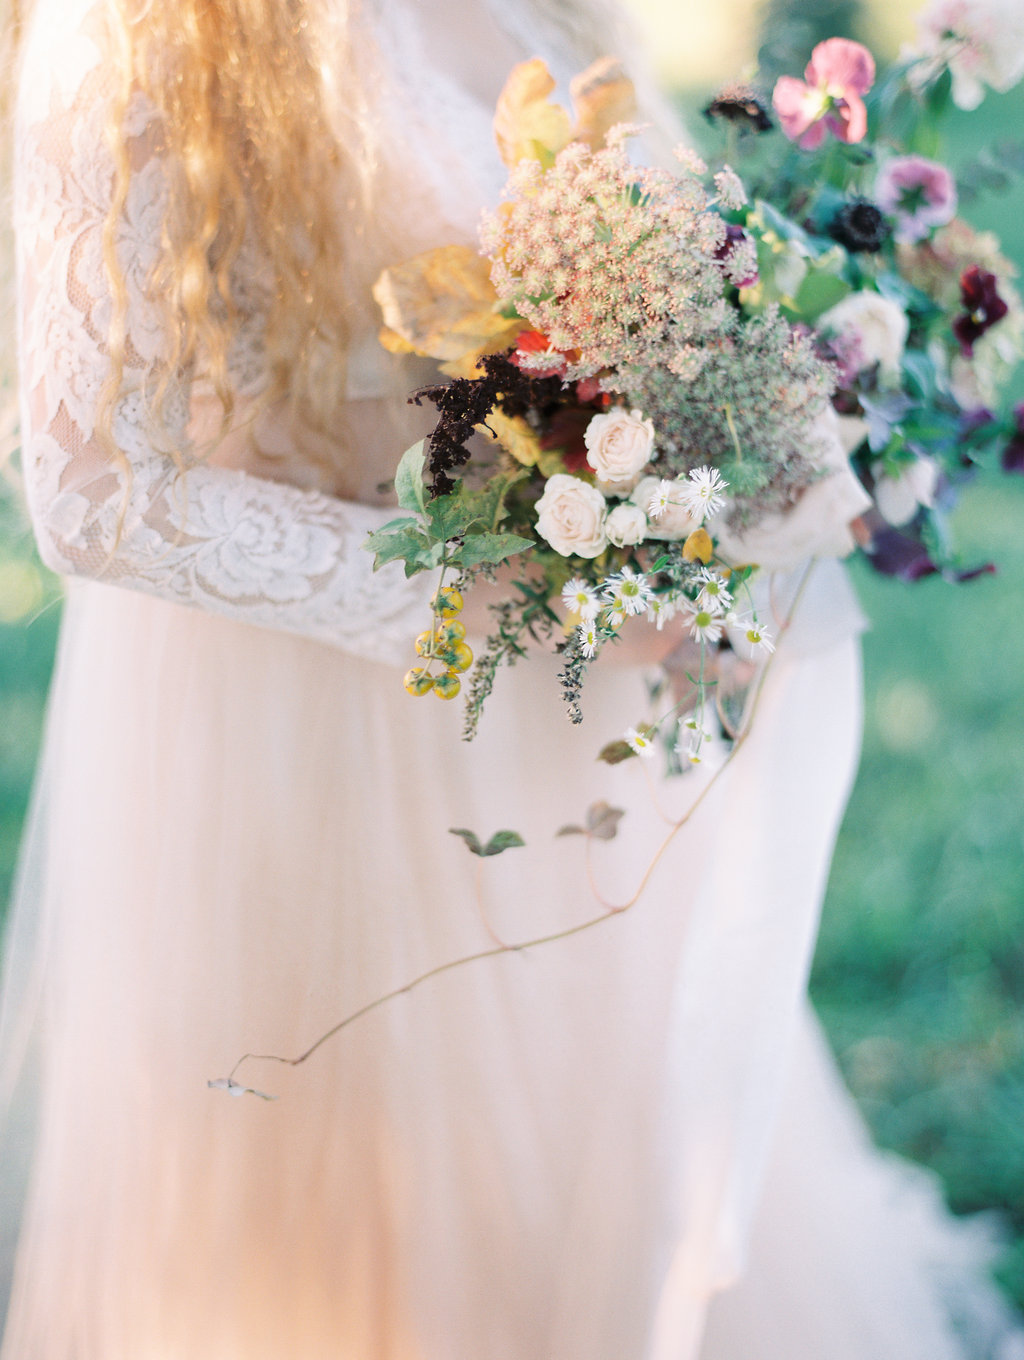 Blush and Burgundy Bridal Bouquet | The Day's Design | Ashley Slater Photography